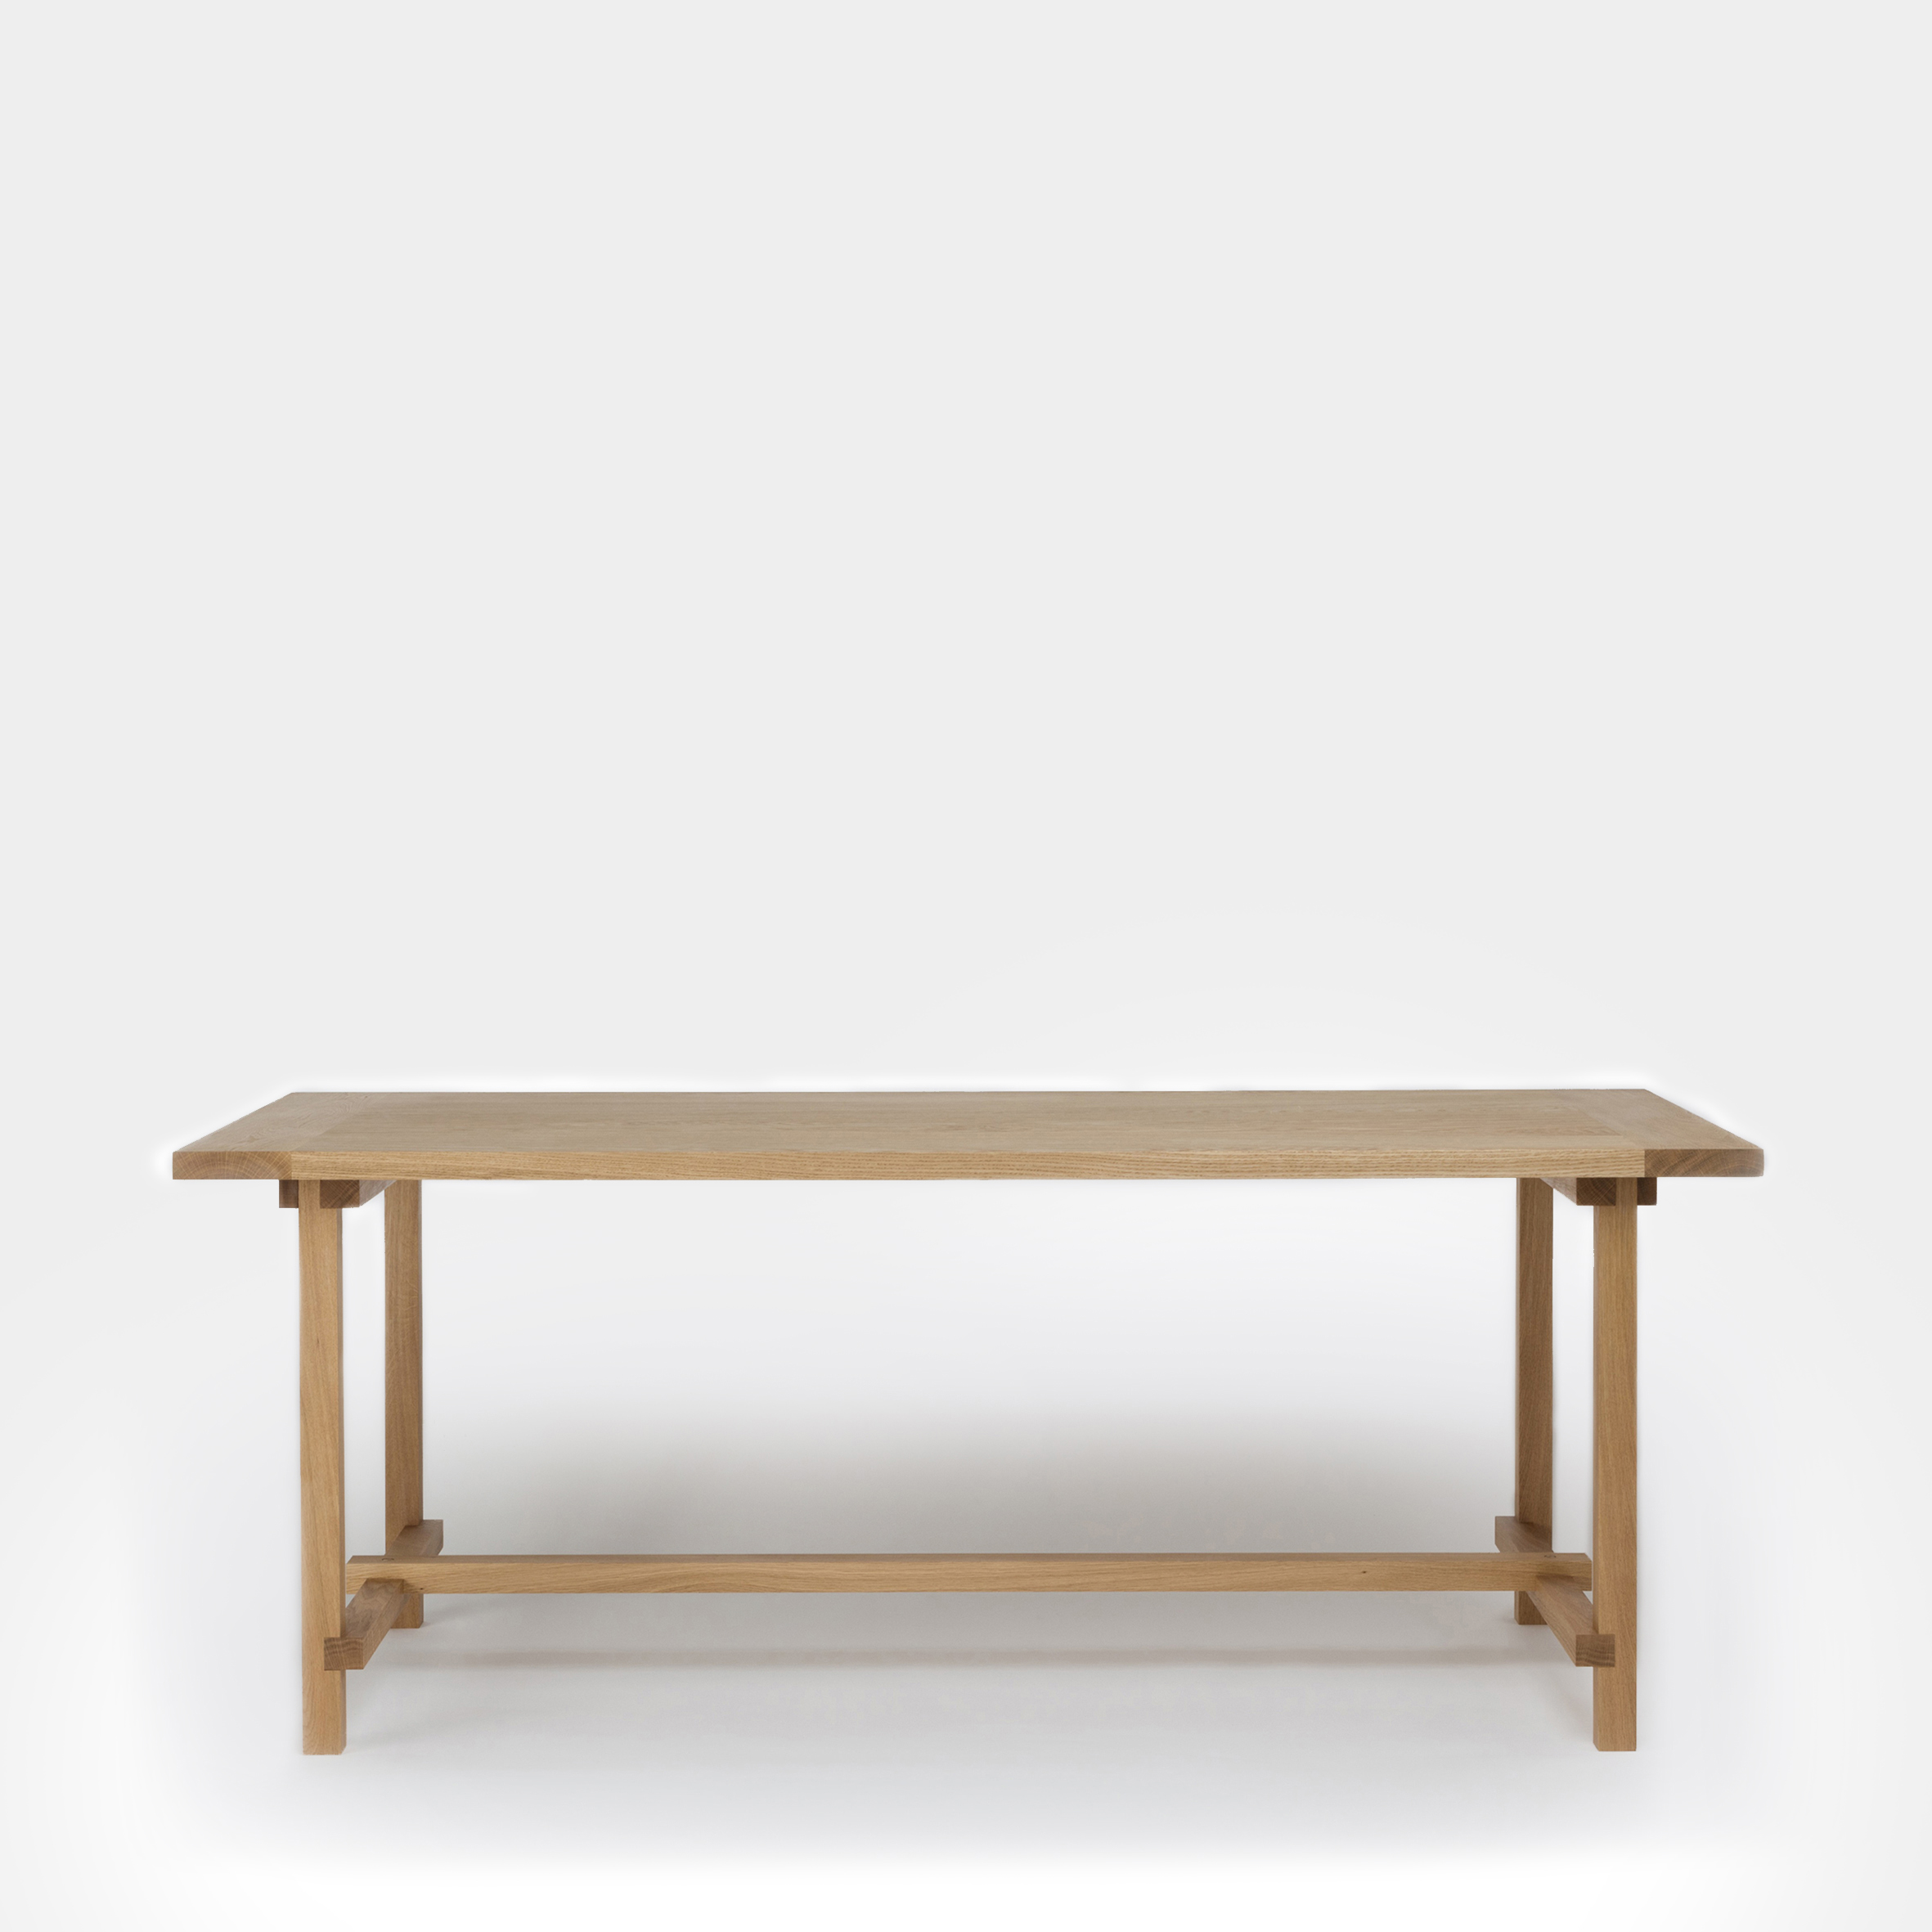 Modern Solid Oak Dining Table Four By, Contemporary Oak Dining Room Furniture